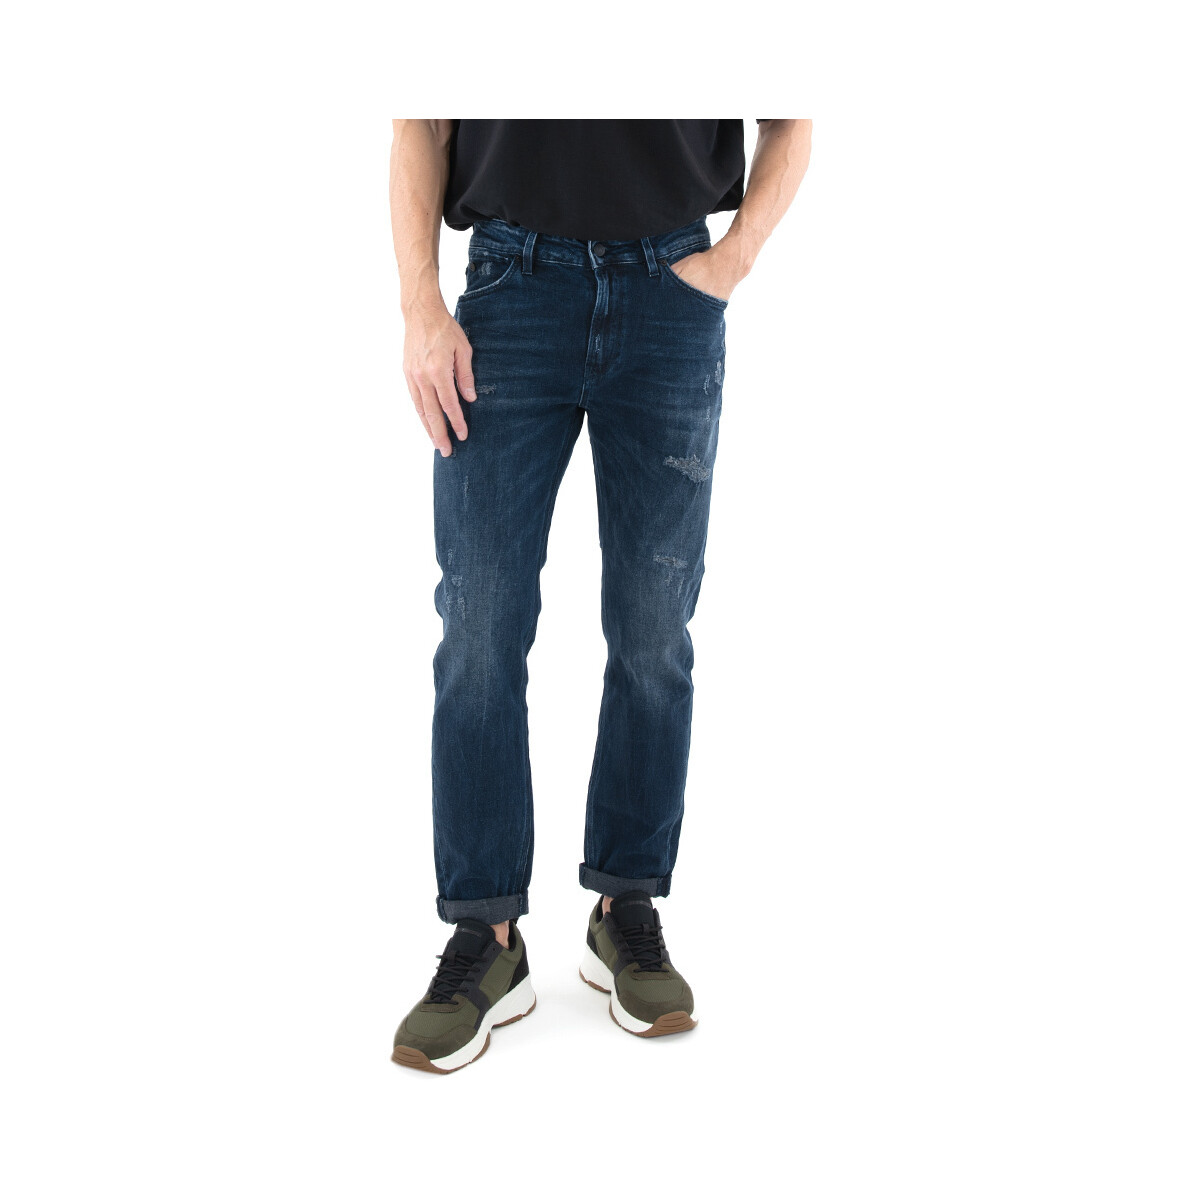 Jeans Staff Jeans SAPPHIRE SLIM FIT TAPERED JEANS MEN 26480490H